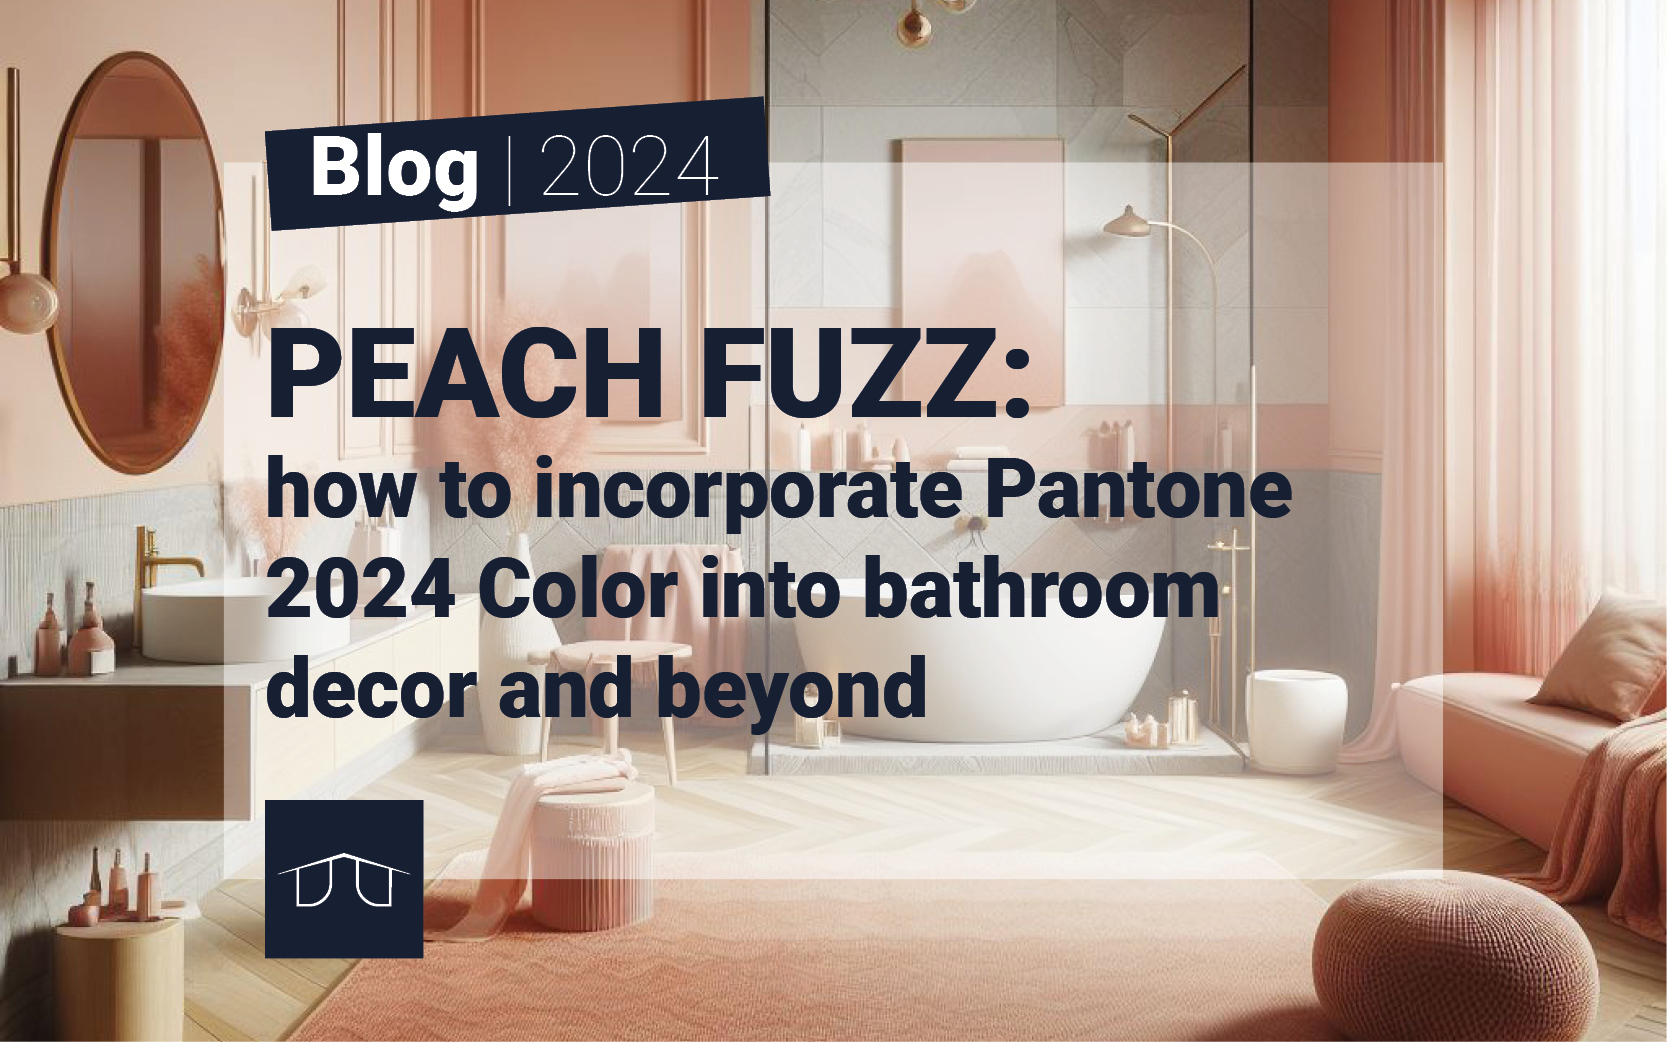 Peach Fuzz: how to incorporate Pantone 2024 Color into bathroom decor and beyond